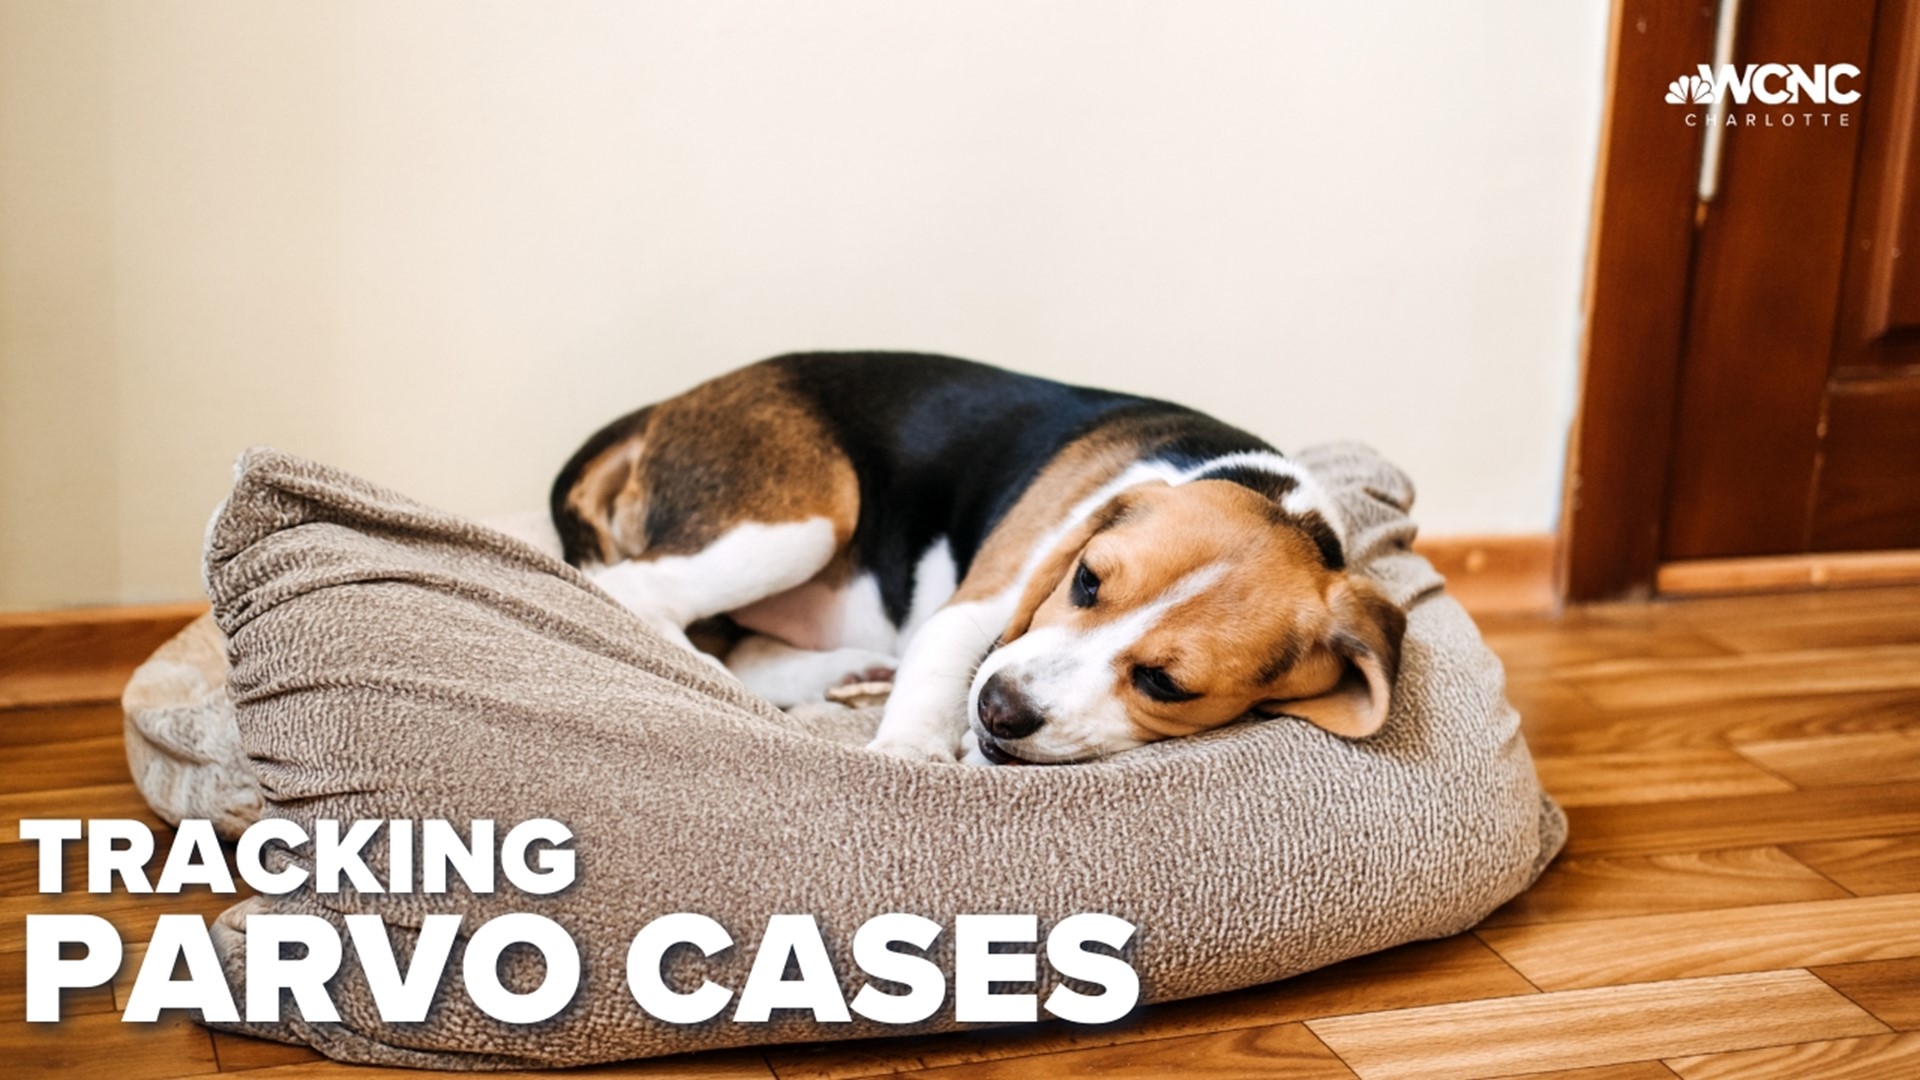 Canine Parvovirus is not a new viral threat, but Dr. Jill Pascarella said the rate of sad outcomes she's seeing from it lately has recently shifted.